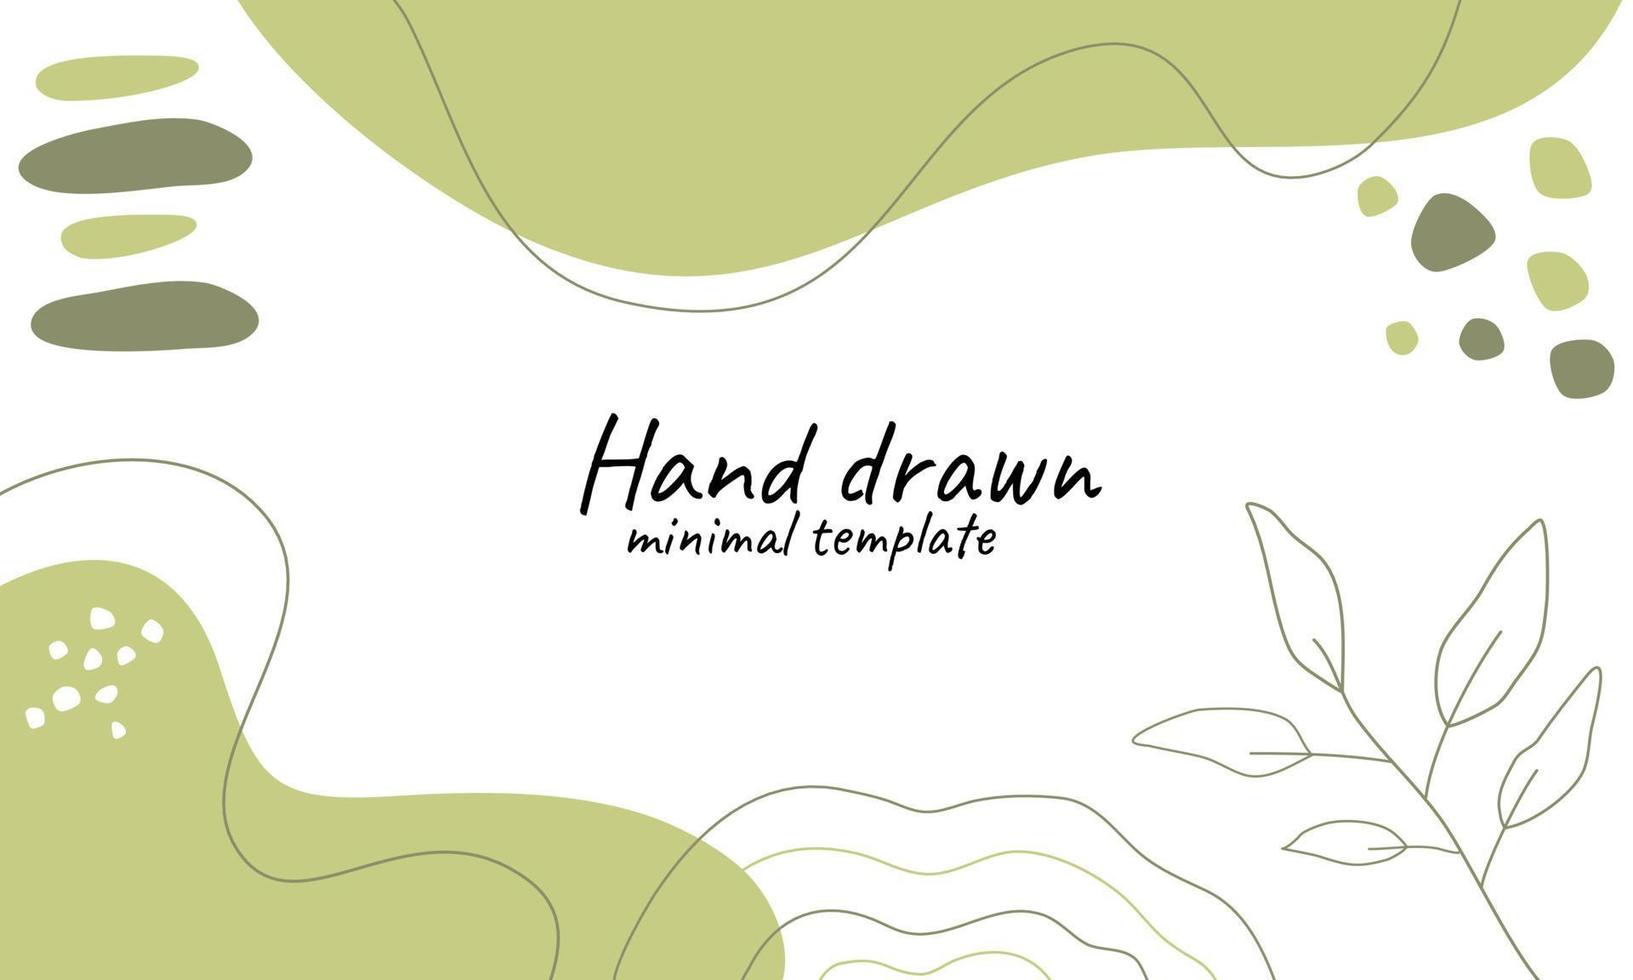 Hand drawn abstract shapes background design vector